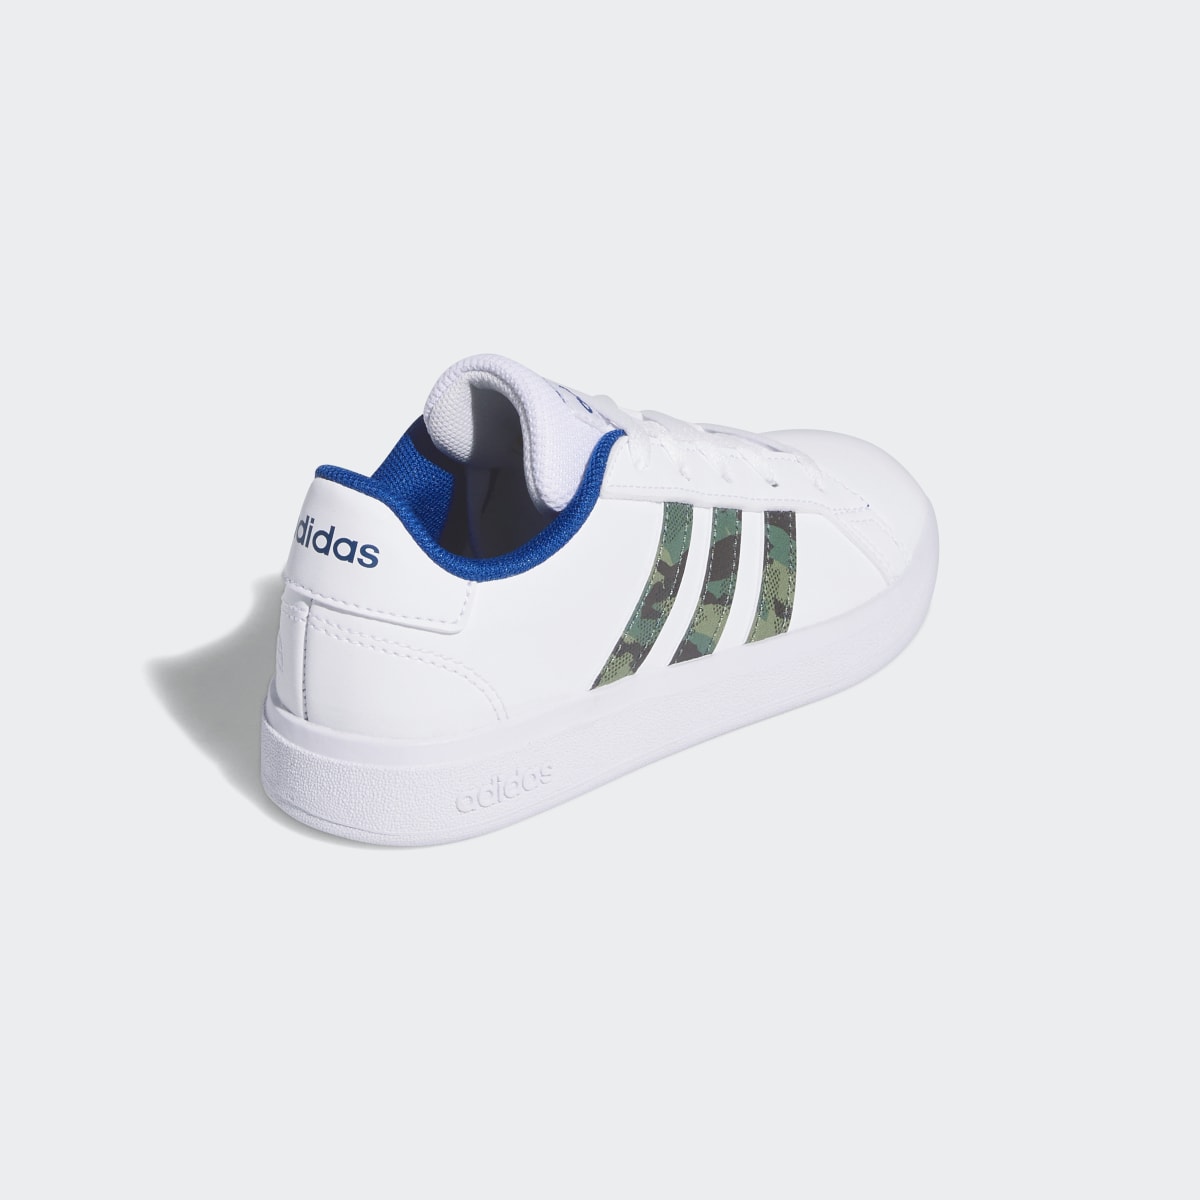 Adidas Grand Court Lifestyle Lace Tennis Shoes. 6